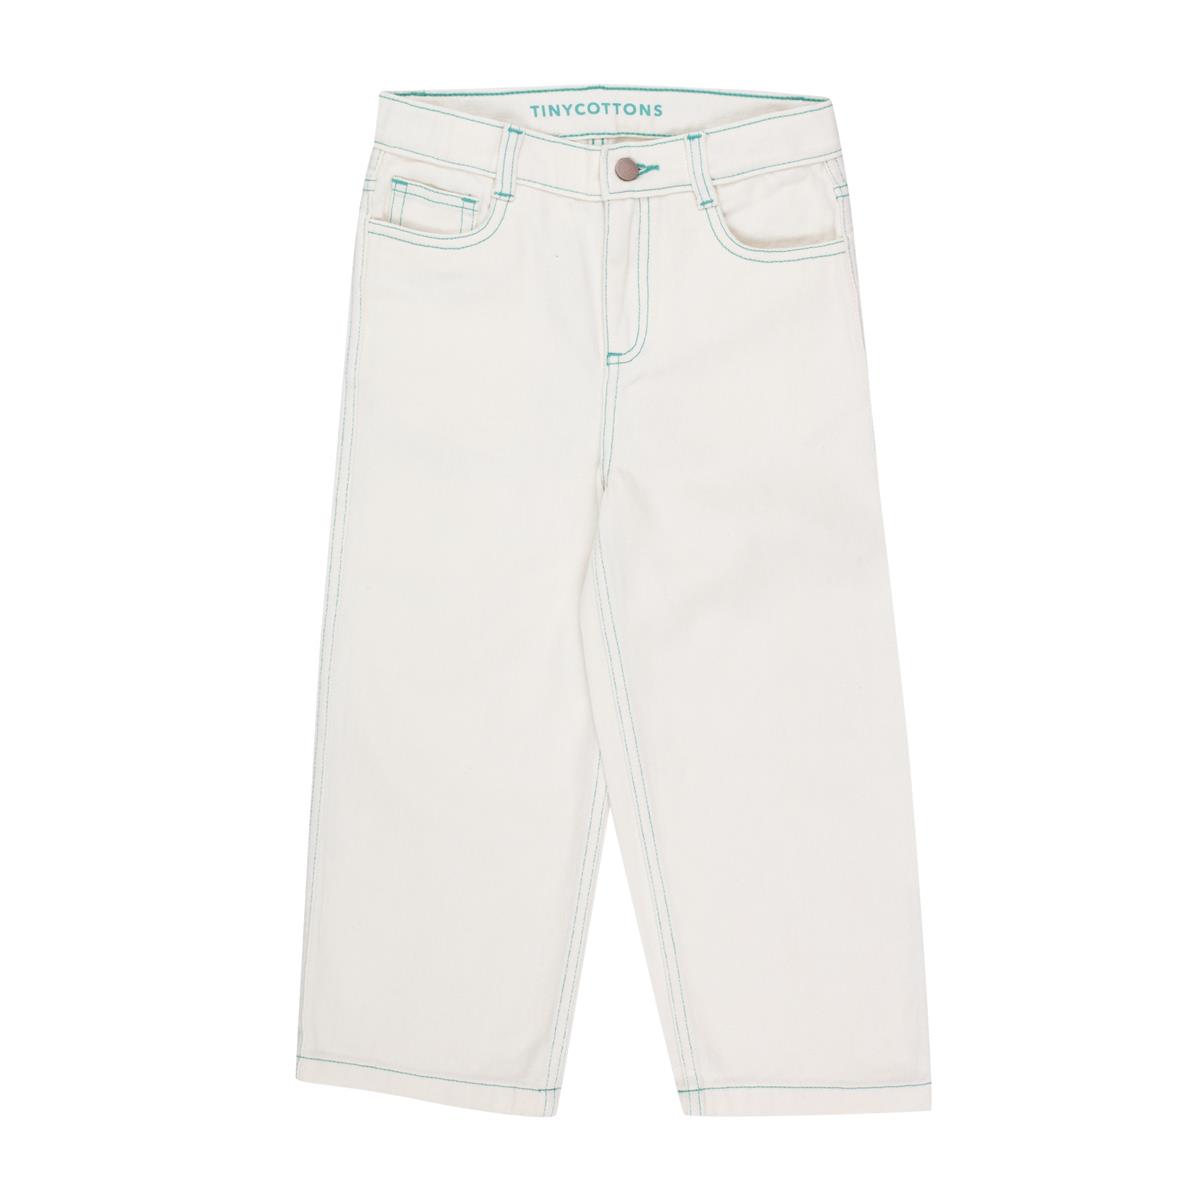 TINYCOTTONS - STRAIGHT JEANS - off-white